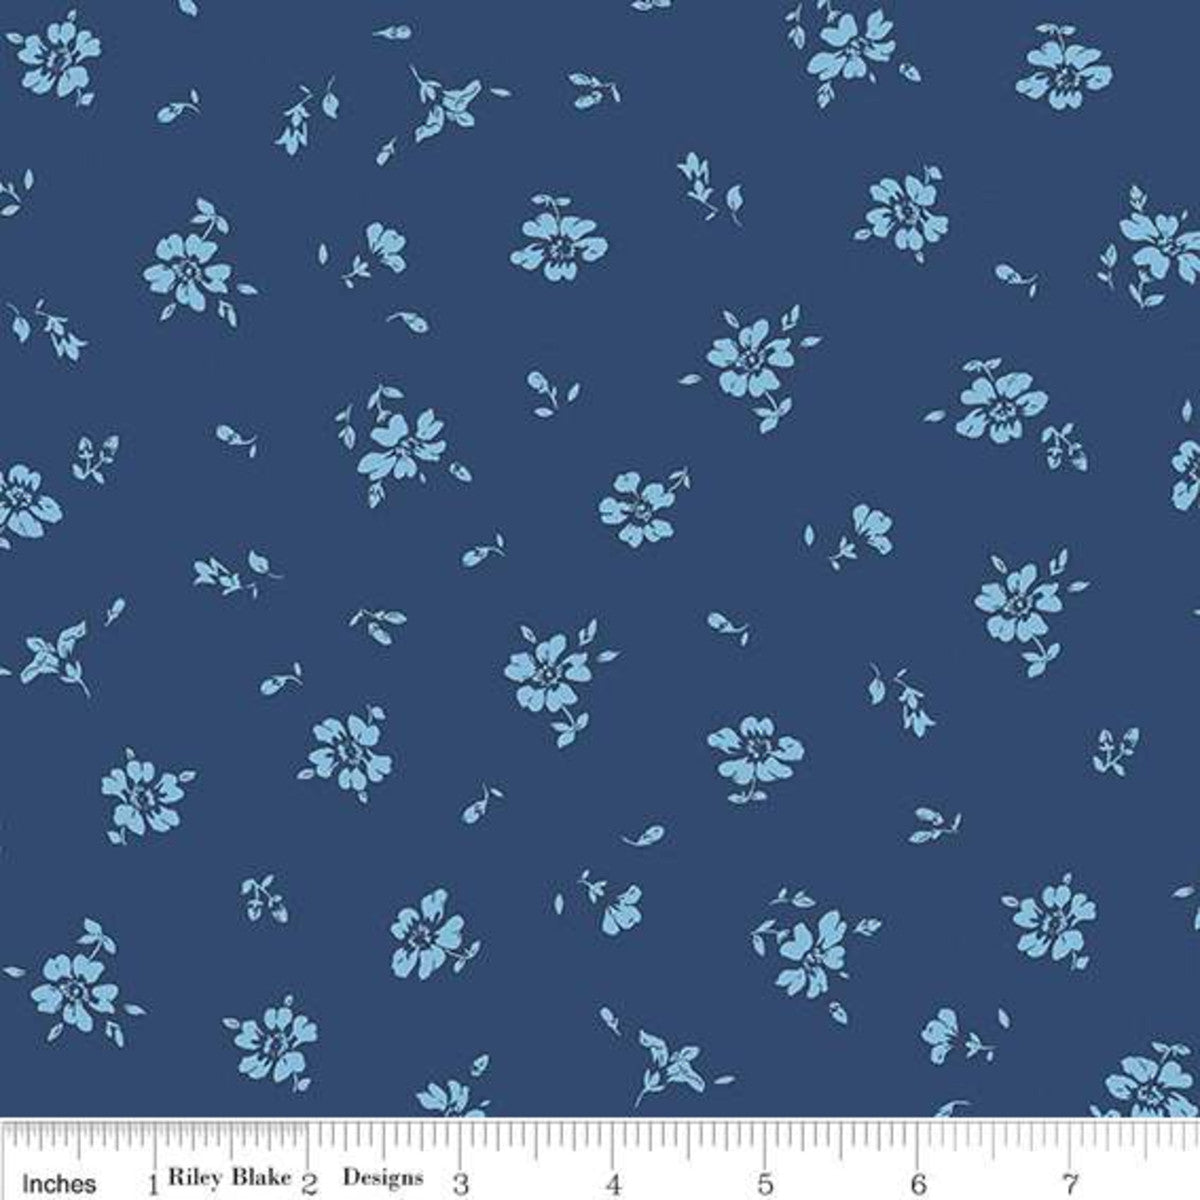 Field Rose - The Flower Show Midnight Garden Collection - Liberty Cotton Fabric ✂️ £10 pm *SALE*